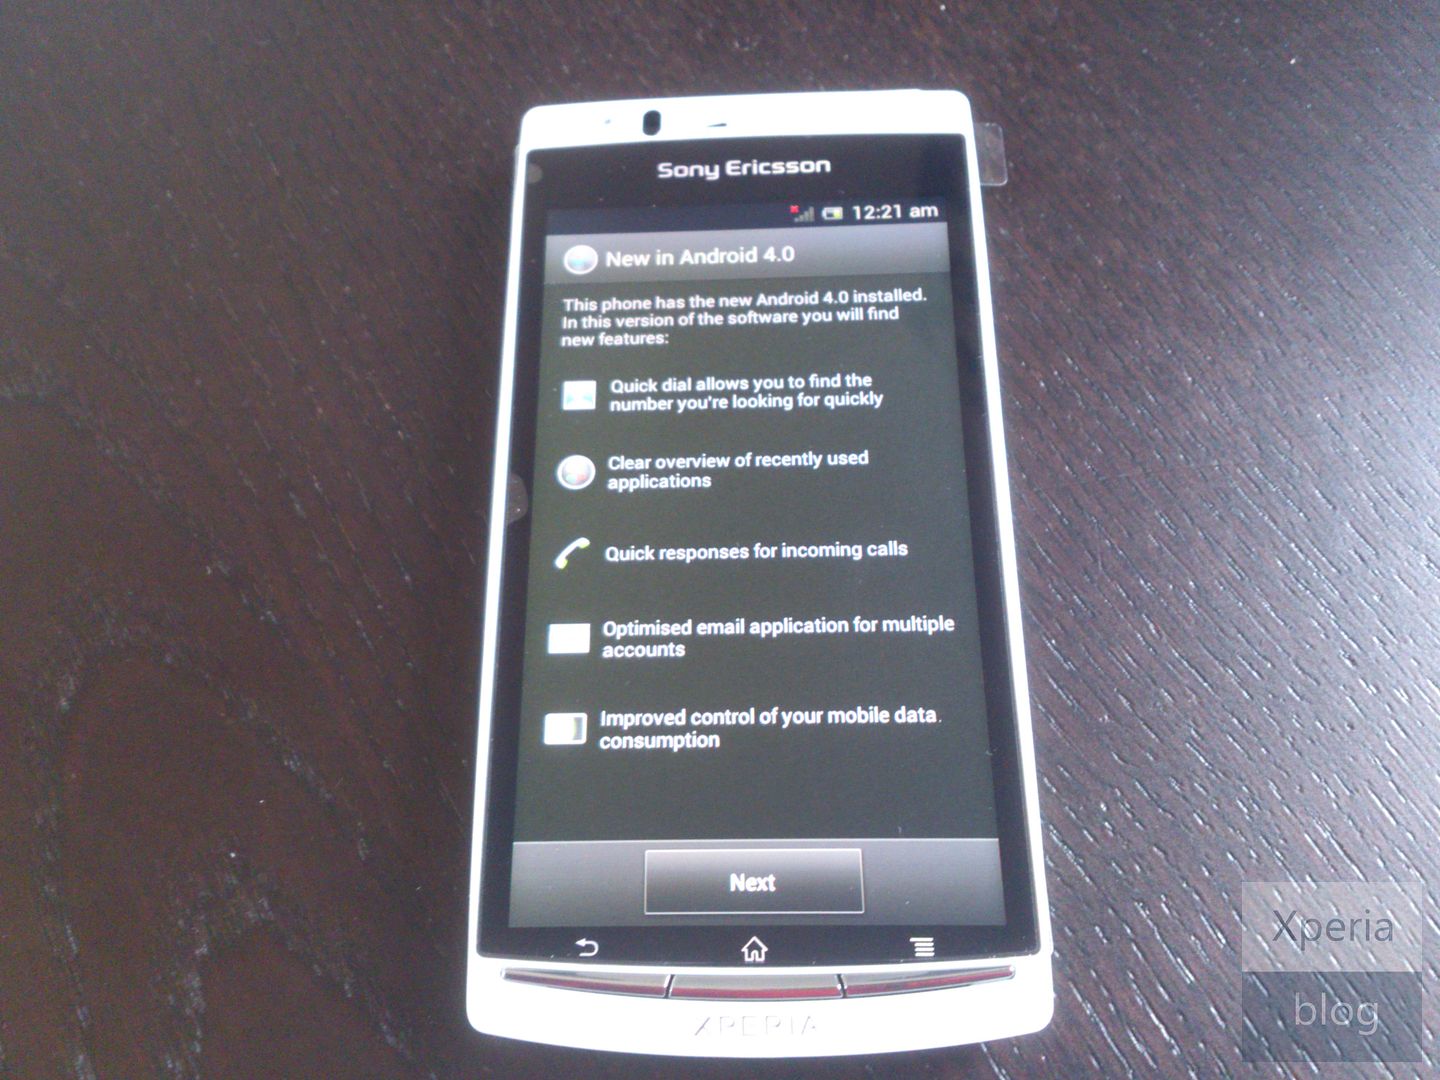 Xperia ICS first boot